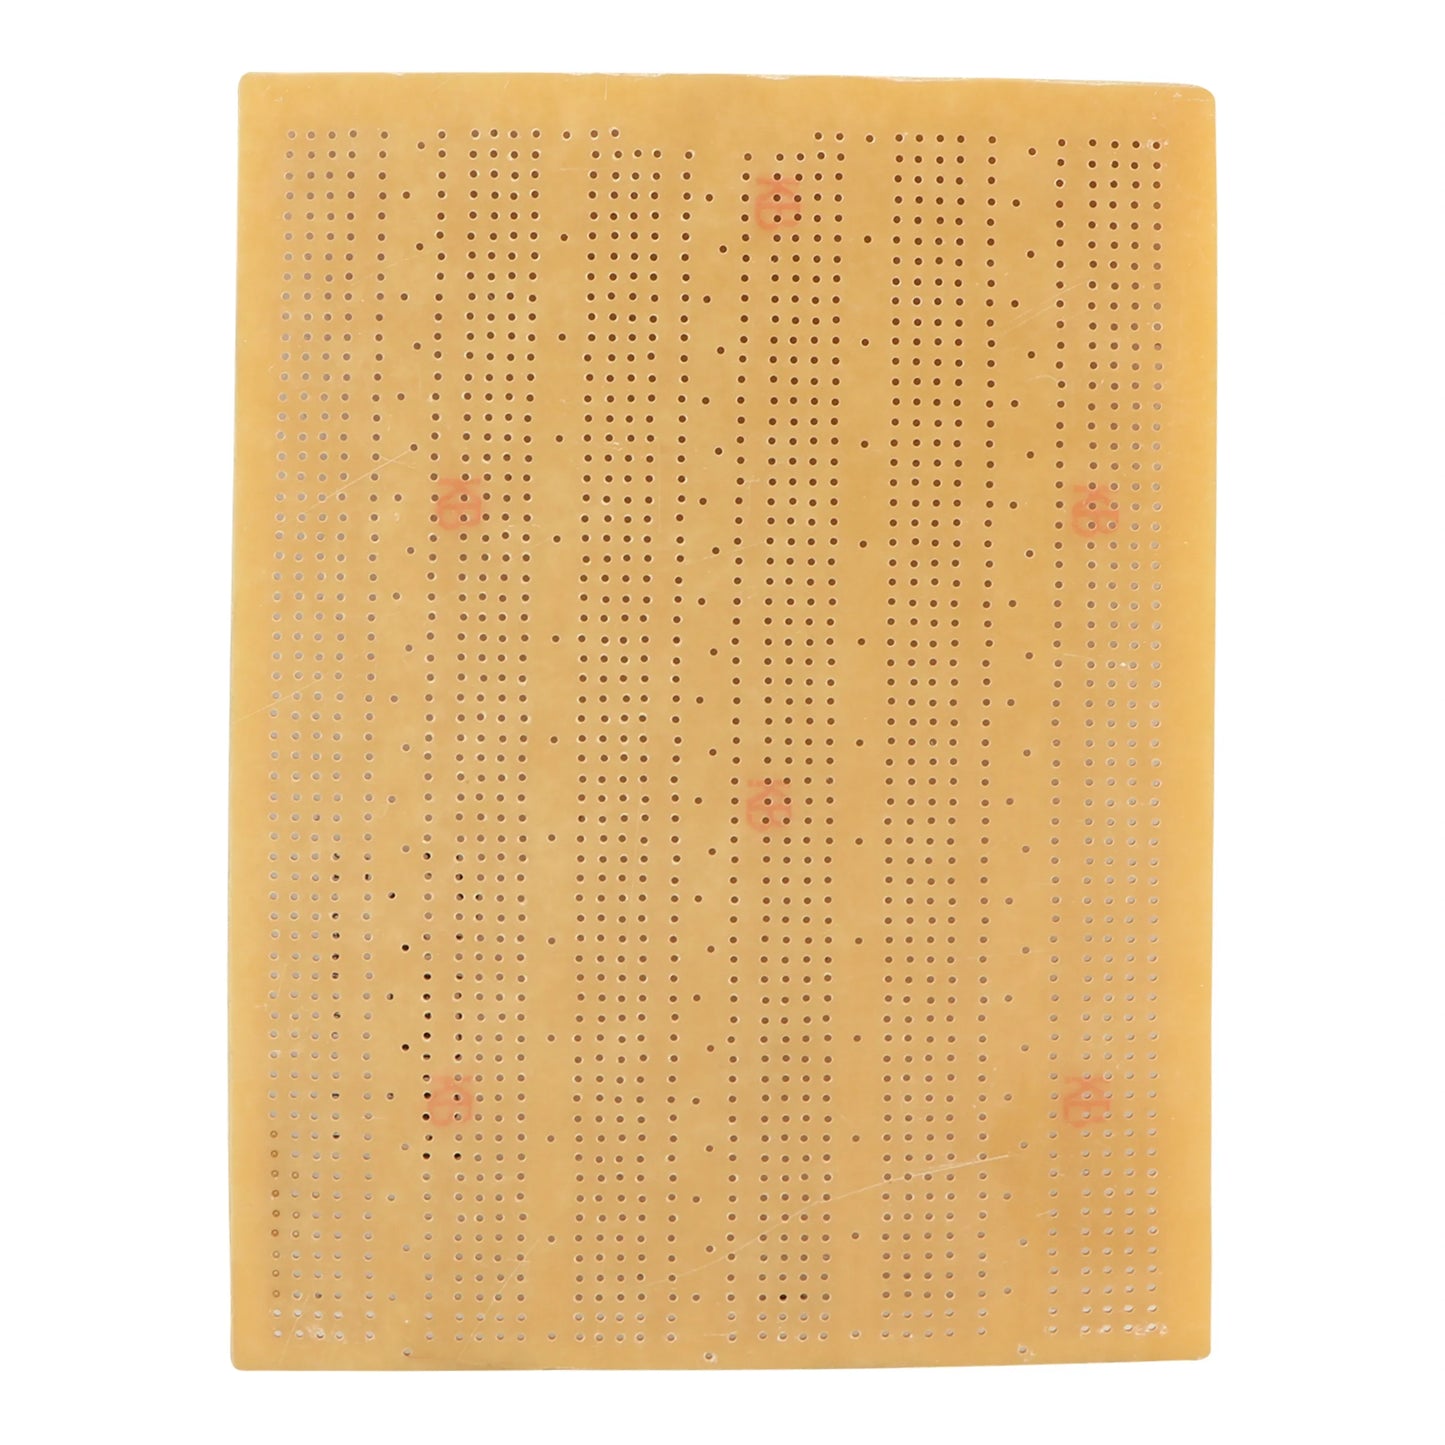 General Purpose PCB Breadboard – FR2 (Set of 5) (120mm x 165mm) – with holes